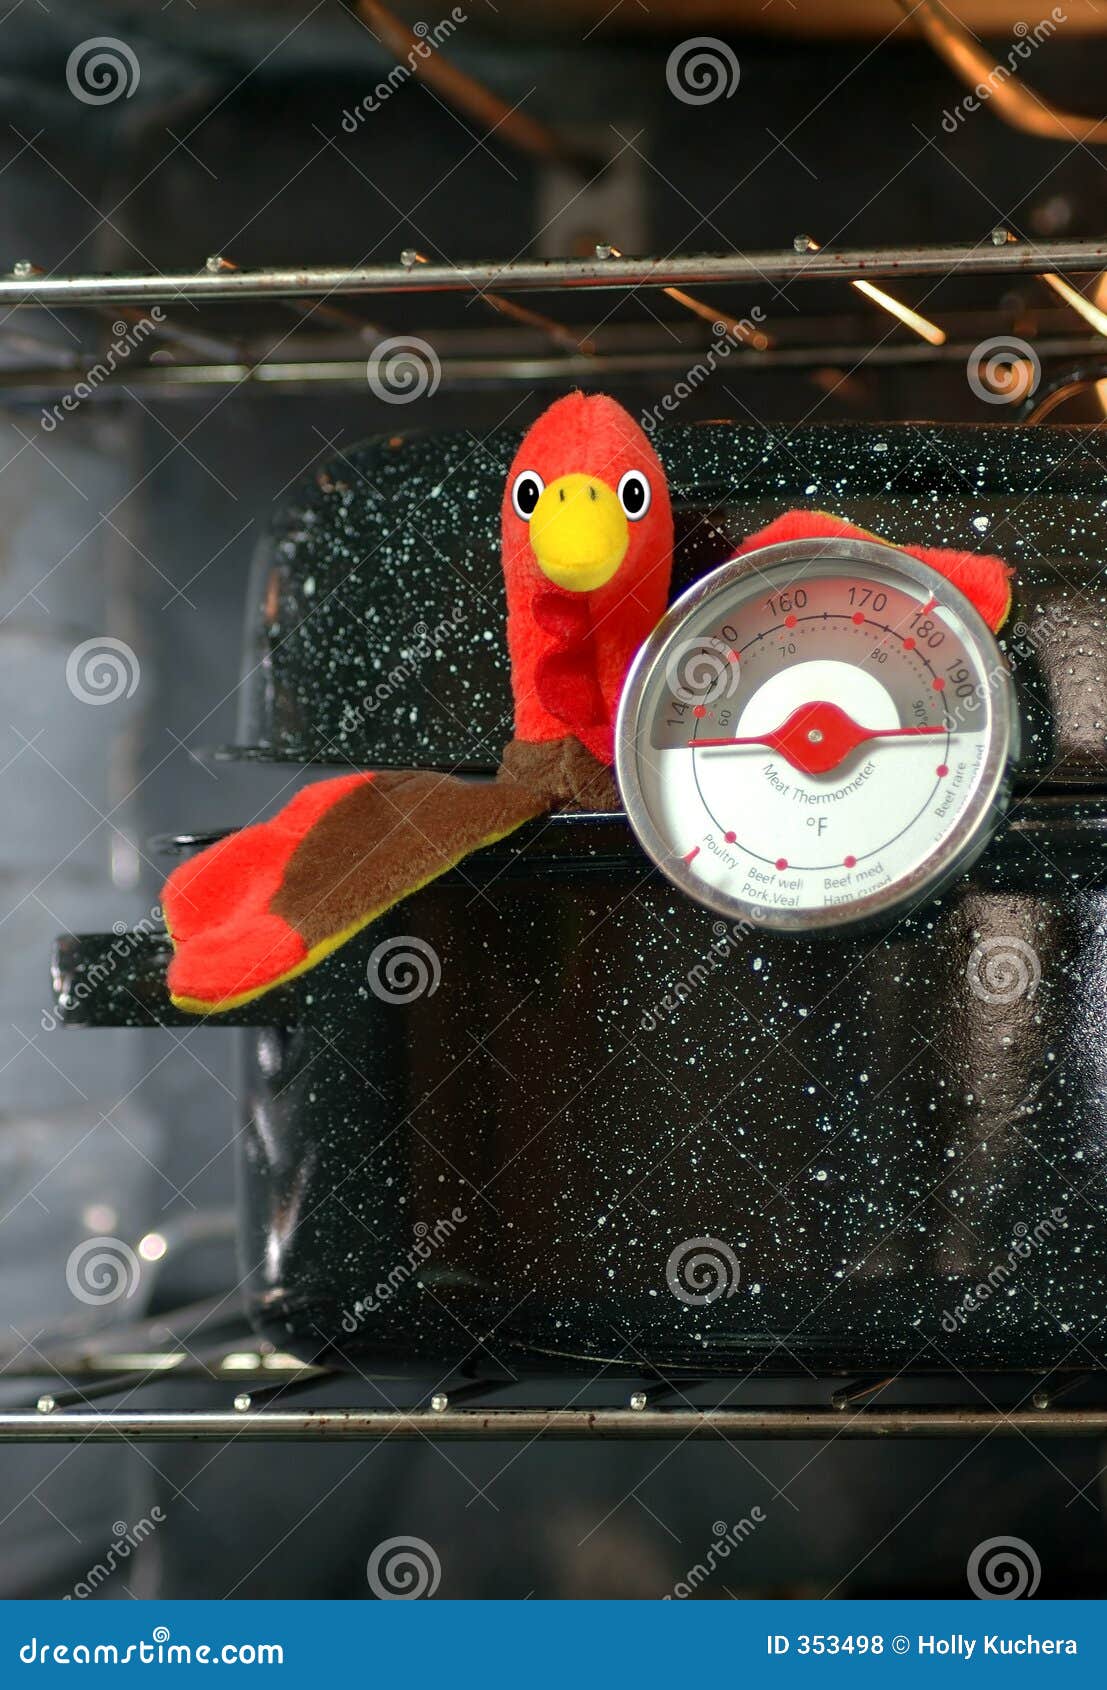 https://thumbs.dreamstime.com/z/turkey-roaster-meat-thermometer-353498.jpg